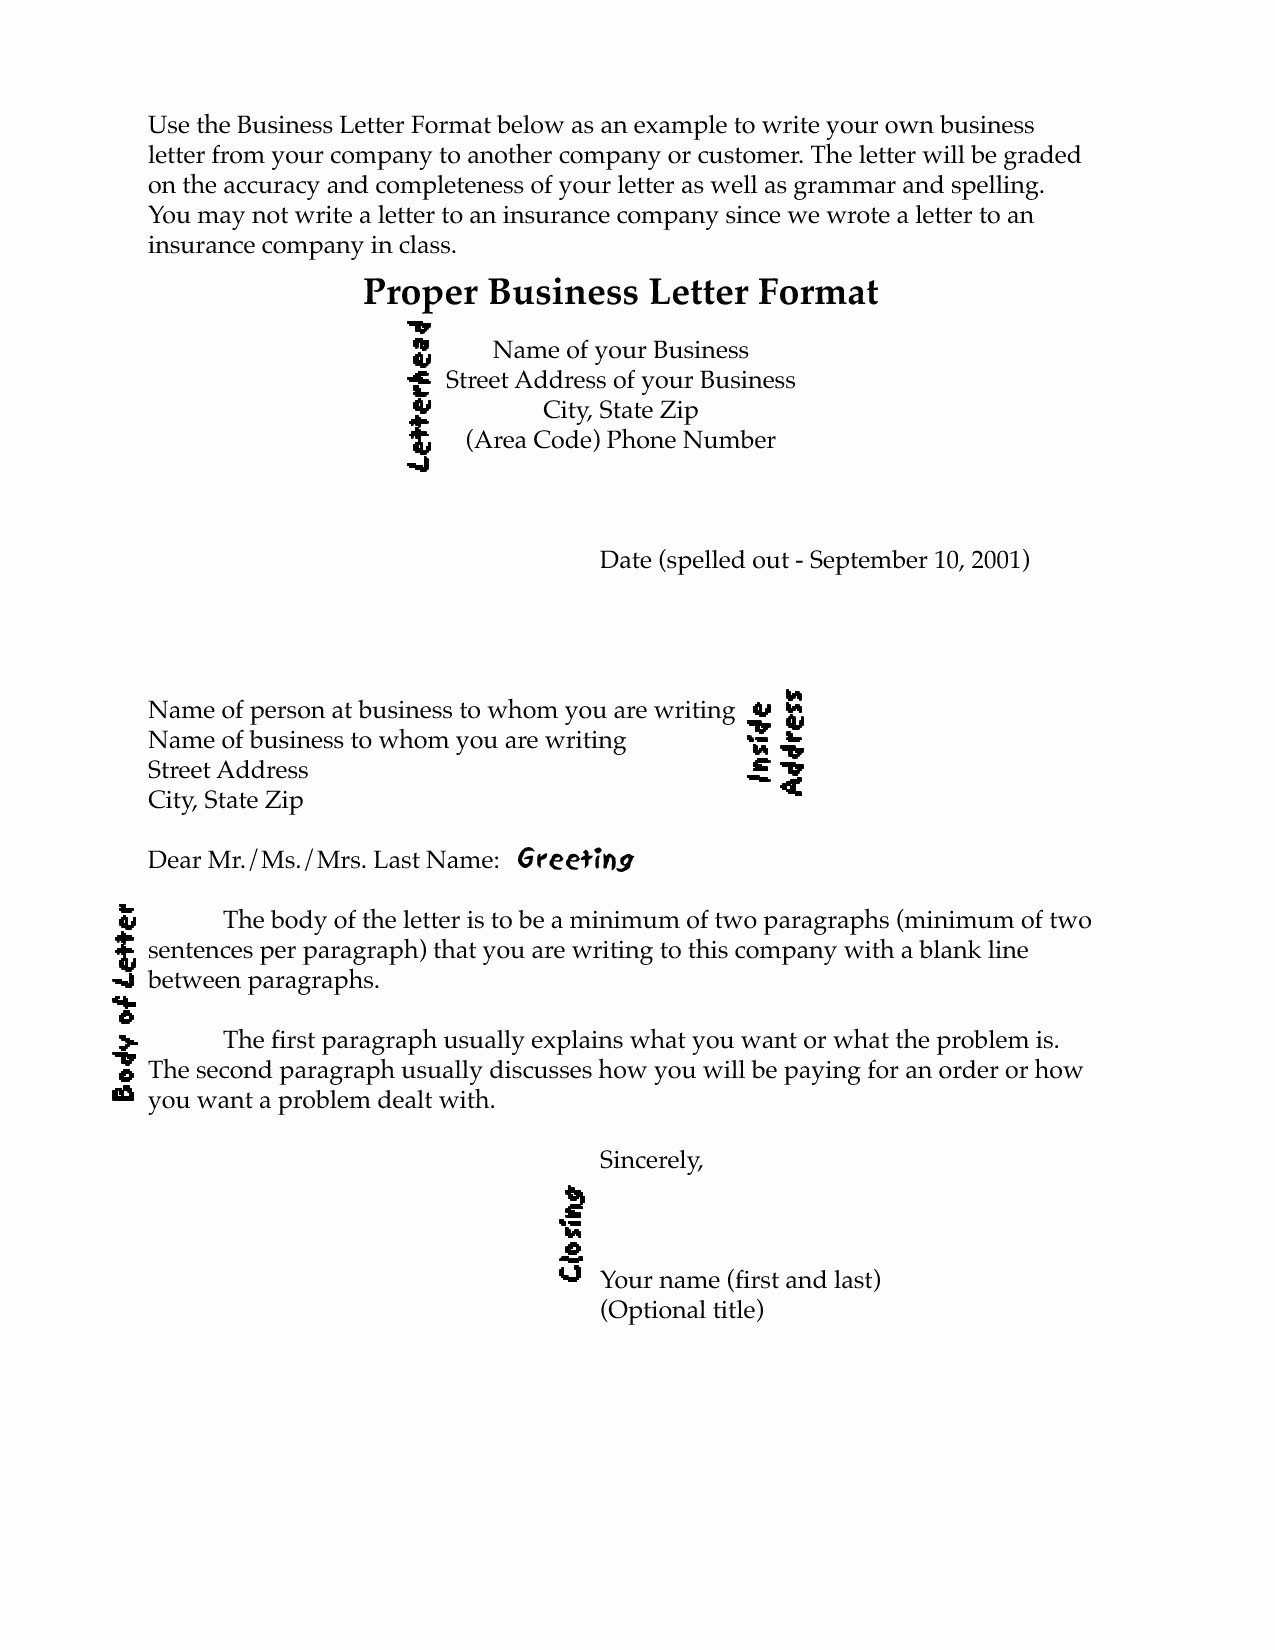 Business Letter format attachment Best Of Example Letter attachment Professional format with Cc